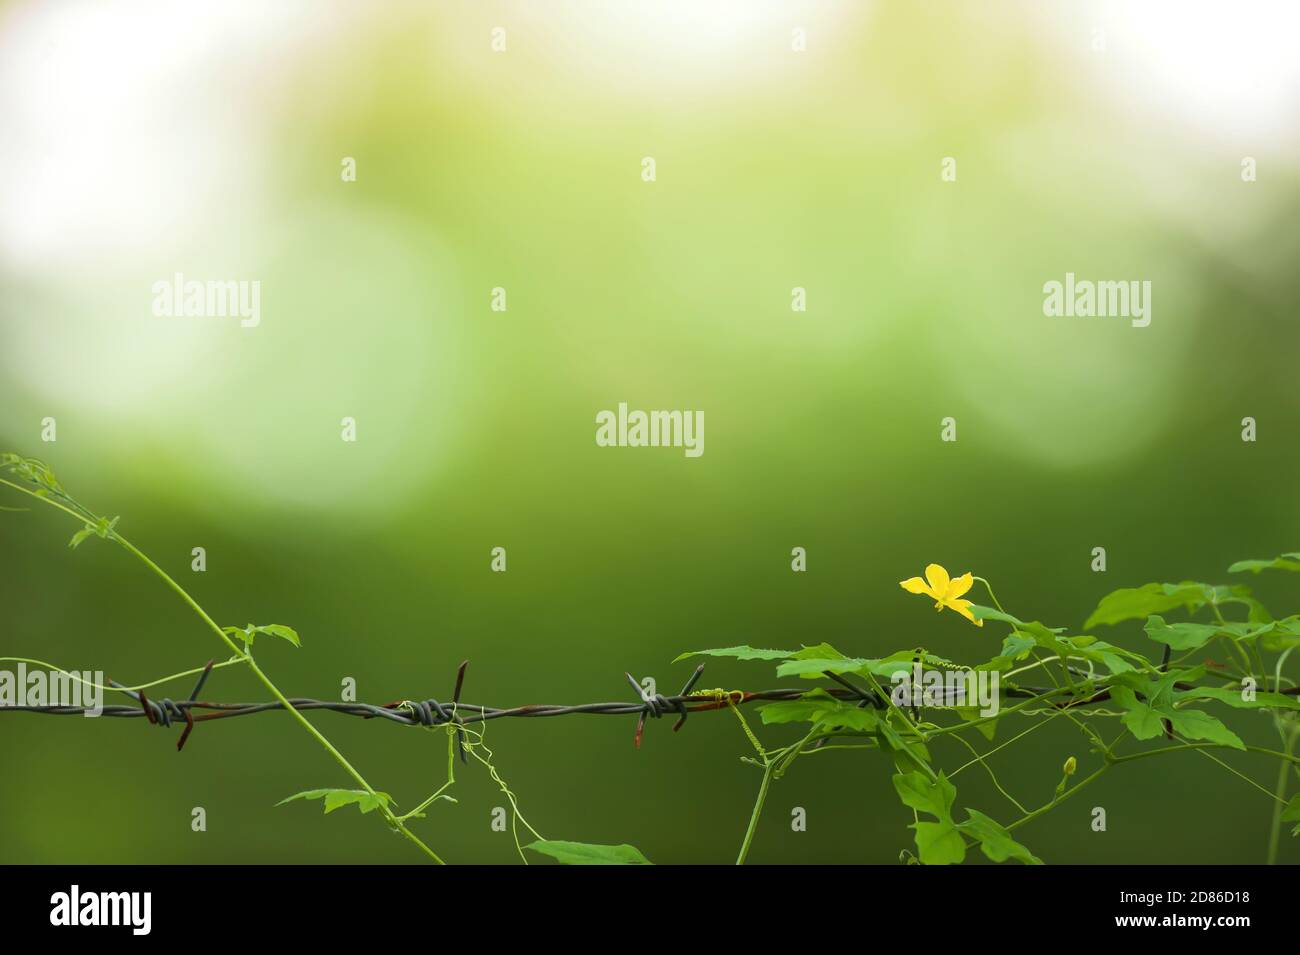 Blooming yellow ivy gourd flower on the barbed wire fence, green garden blurred in the background. Focus on yellow flower. Stock Photo